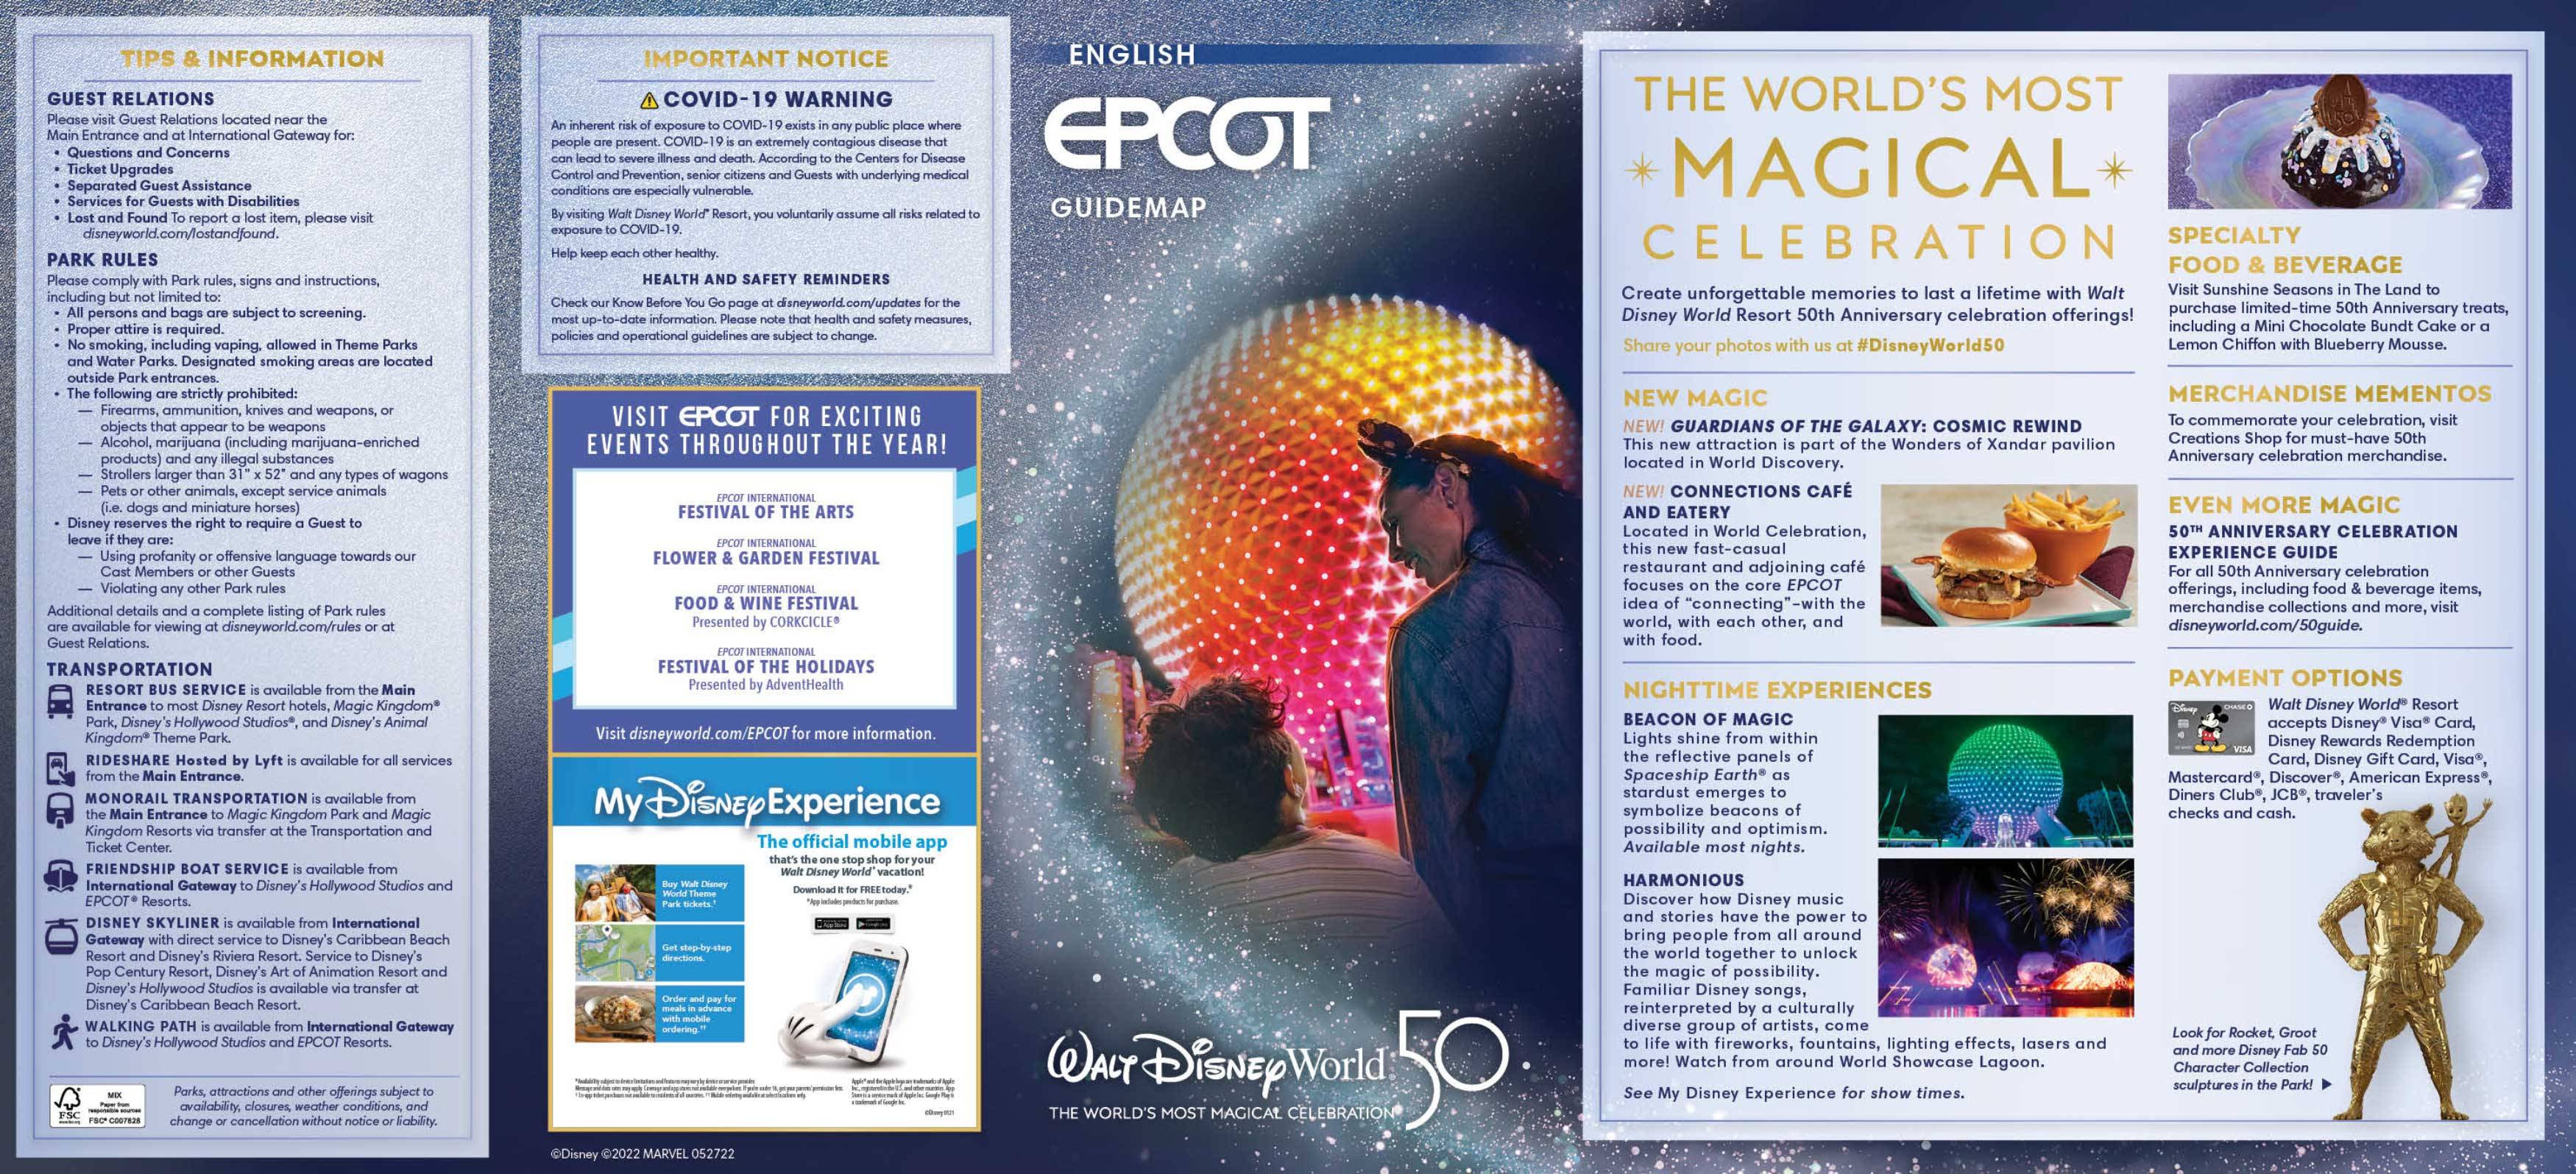 New guide map for EPCOT highlights Guardians of the Galaxy Cosmic Rewind and Connections Cafe and Eatery